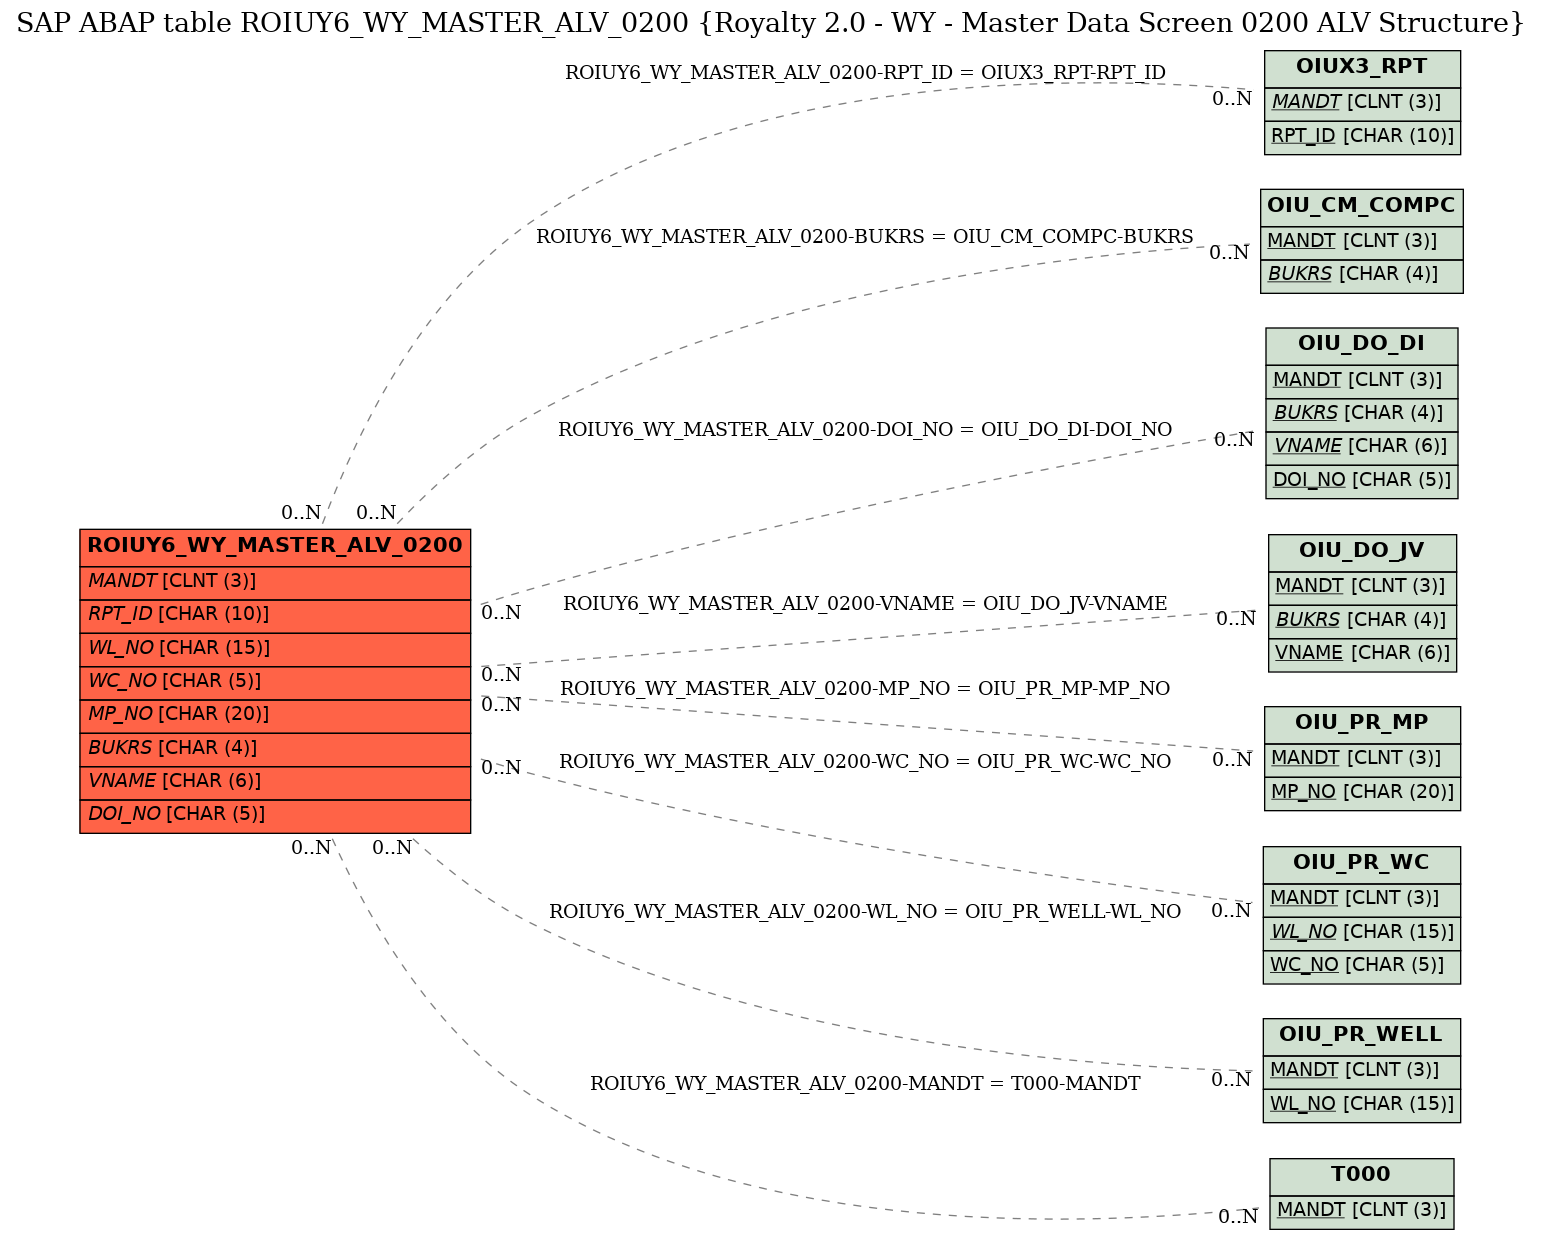 E-R Diagram for table ROIUY6_WY_MASTER_ALV_0200 (Royalty 2.0 - WY - Master Data Screen 0200 ALV Structure)